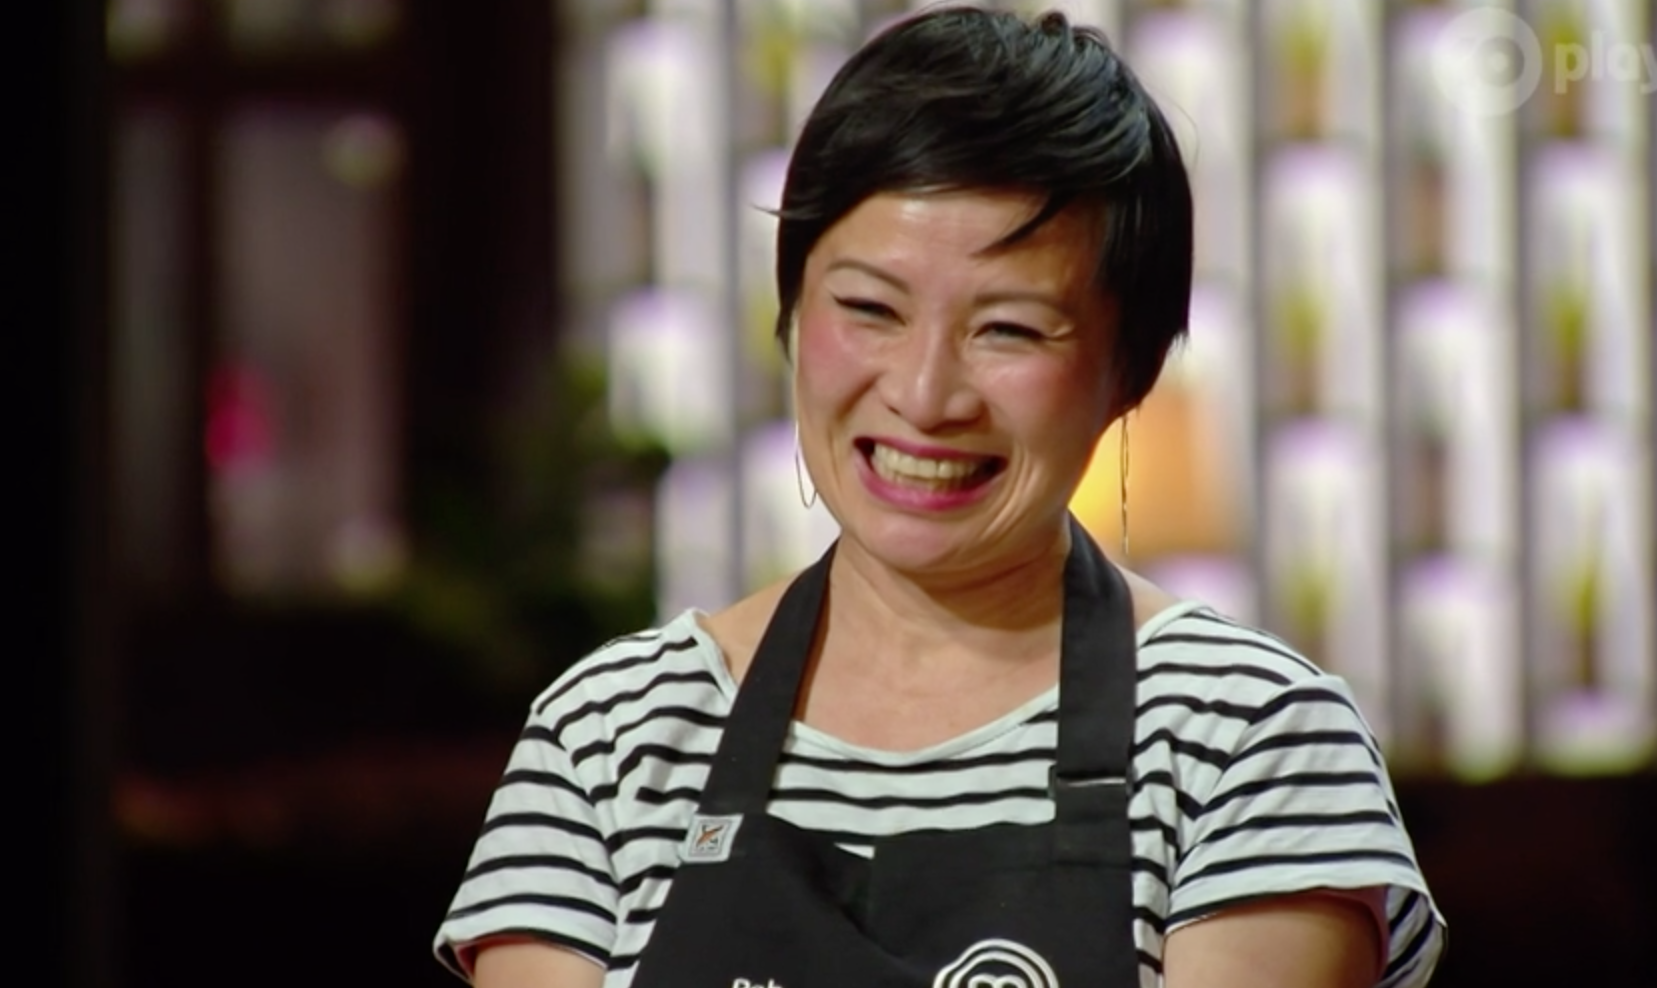 A Love Letter To Poh Ling Yeow, The ‘Masterchef’ Queen Of My Heart